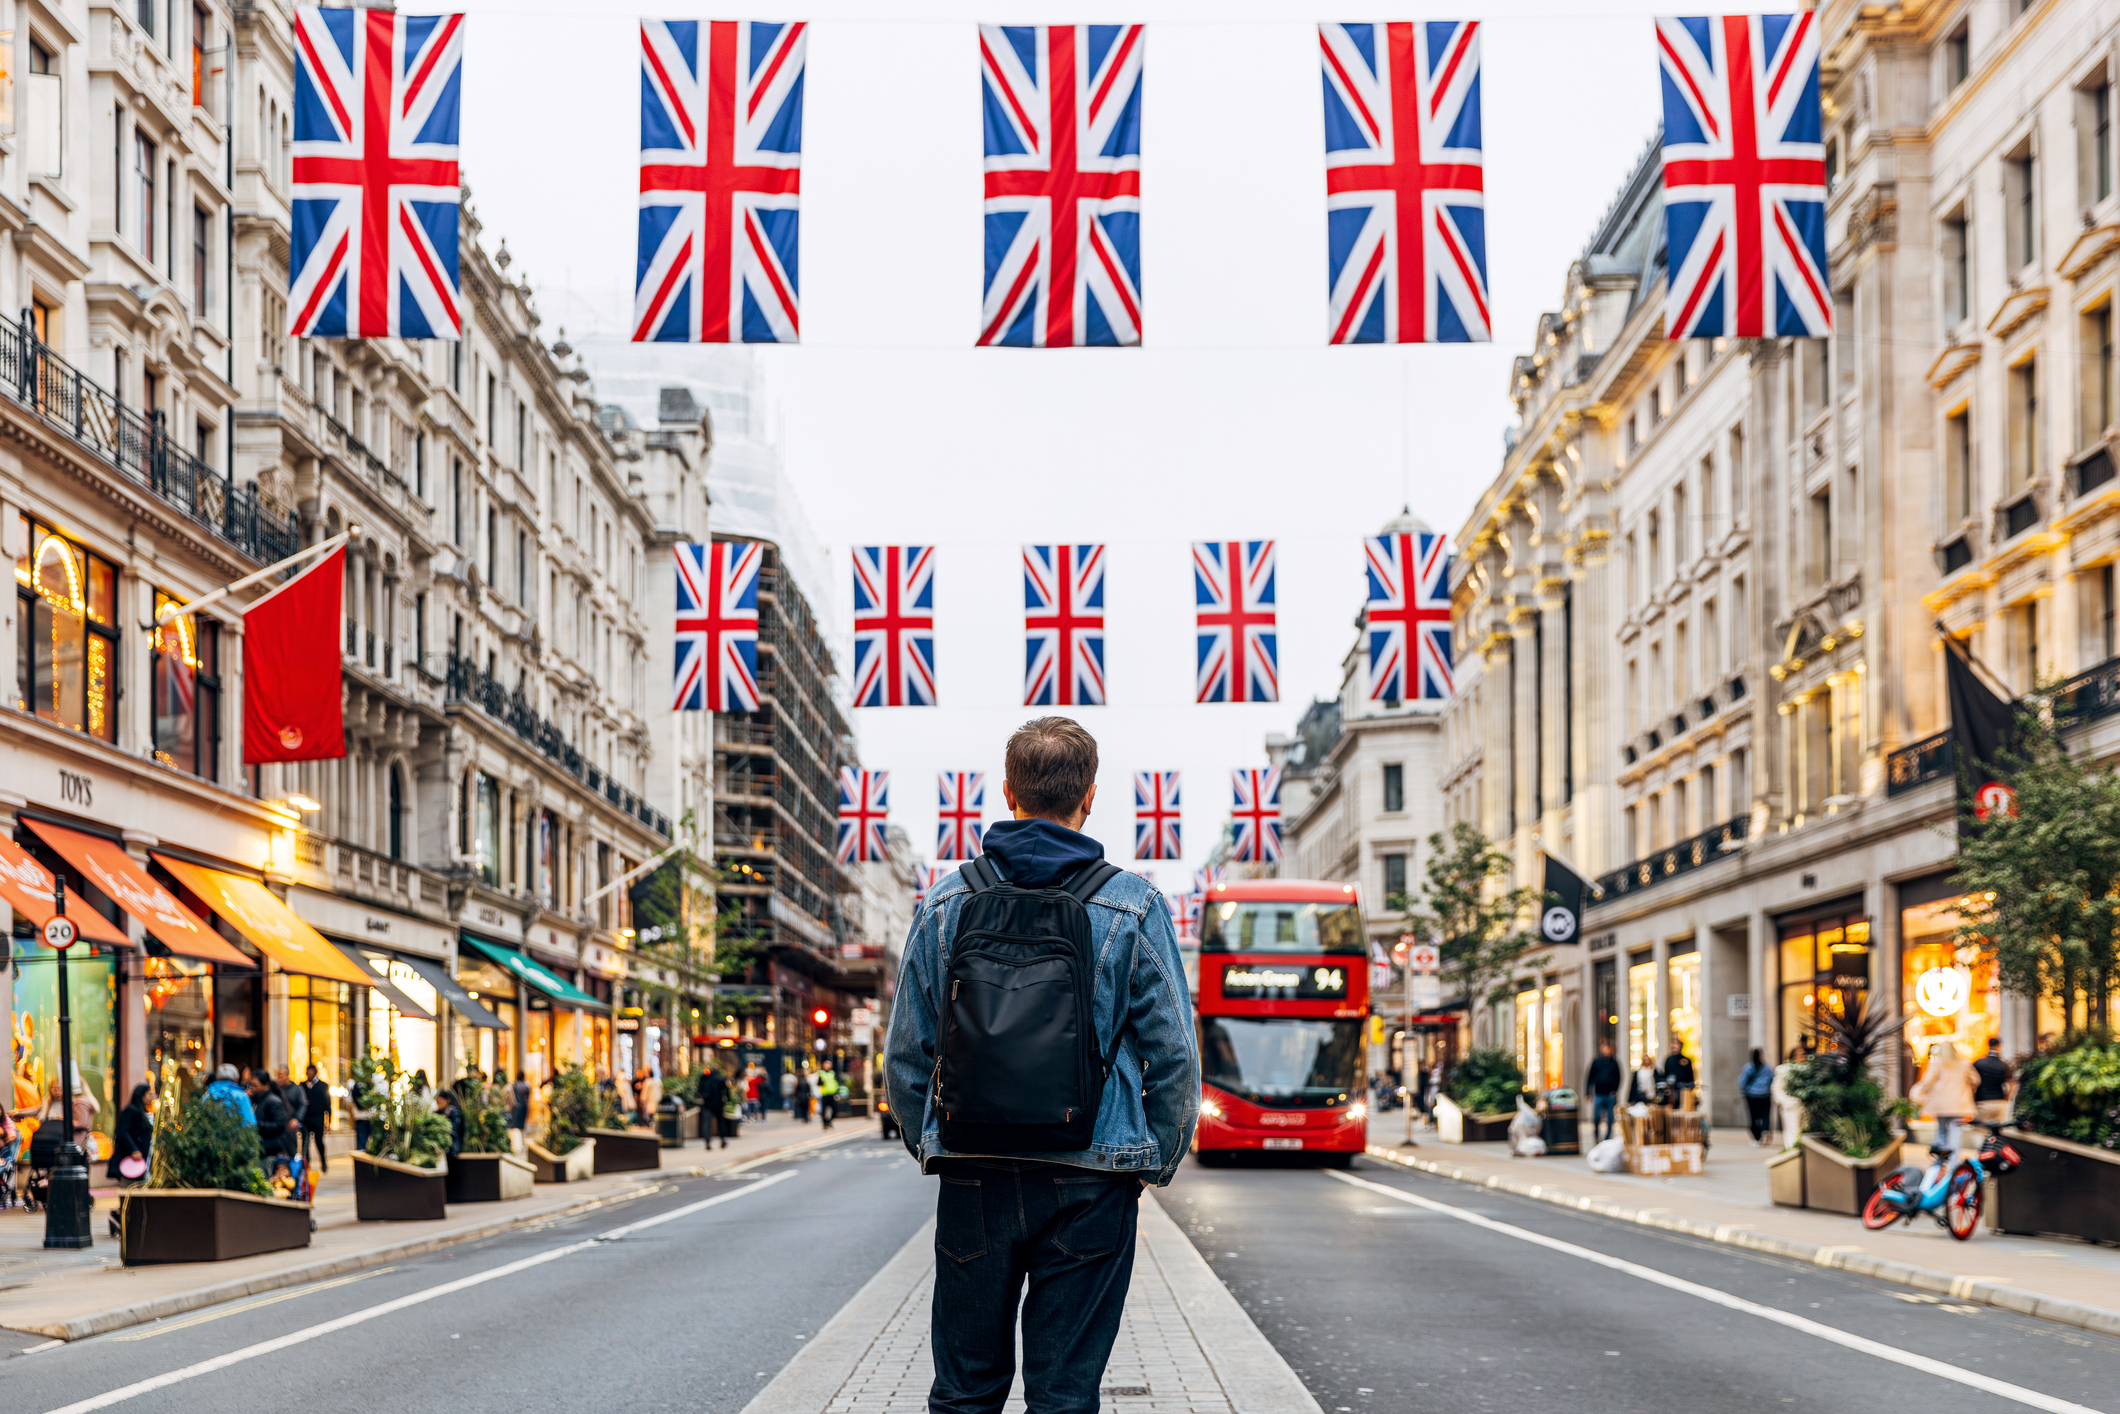 A man on a street with British flags everywhere